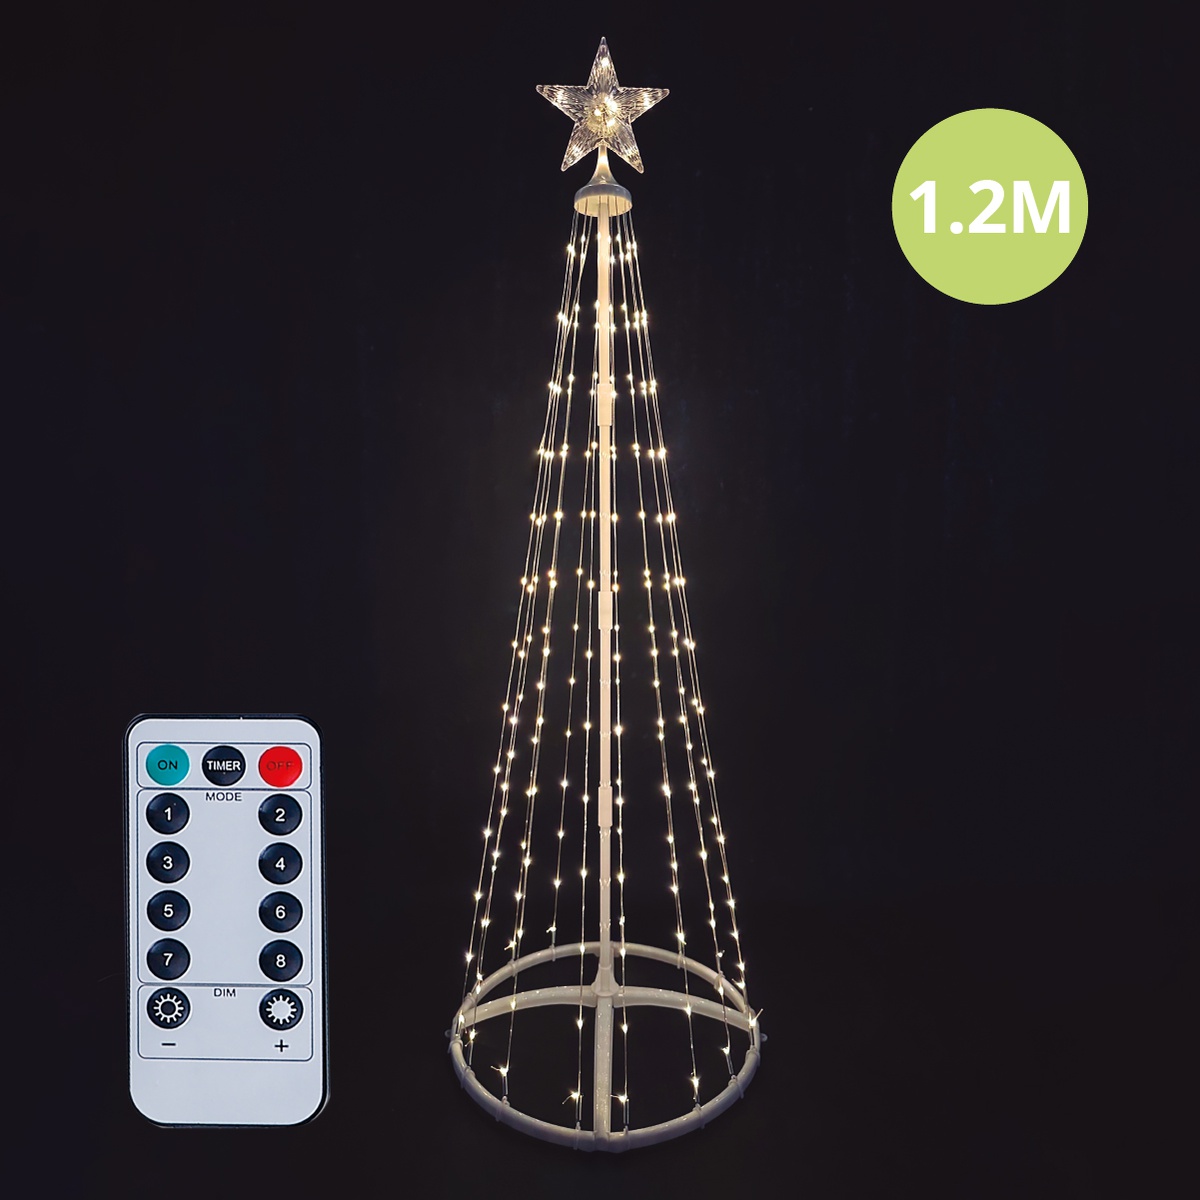 1,2M USB LED Tree with remote 8 functions Warm White IP44